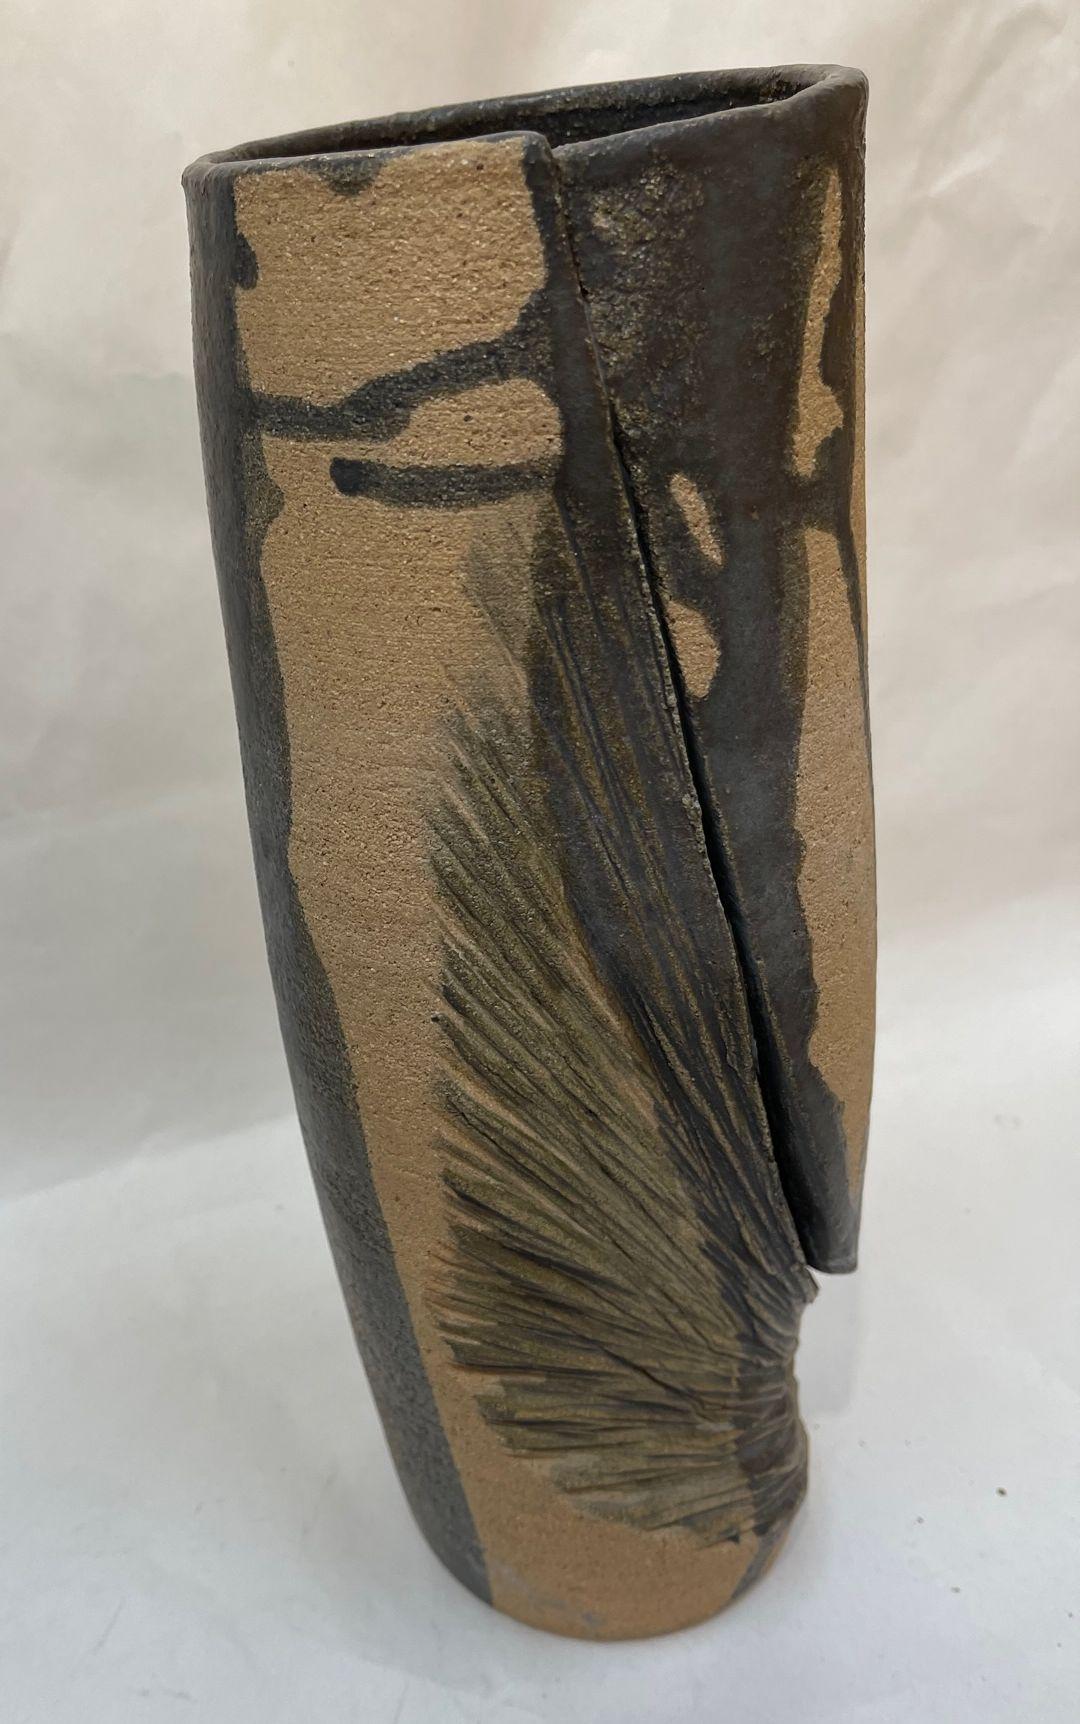 Awesome Modernist tall Studio vase featuring Matte Greenish grey abstract designs. Beautifully Hand-crafted One of a Kind Vase by a master potter. Measures: Approx. 11.5” H x 3.75” D. Signed: Harry V on underside. Beautiful addition to your home,